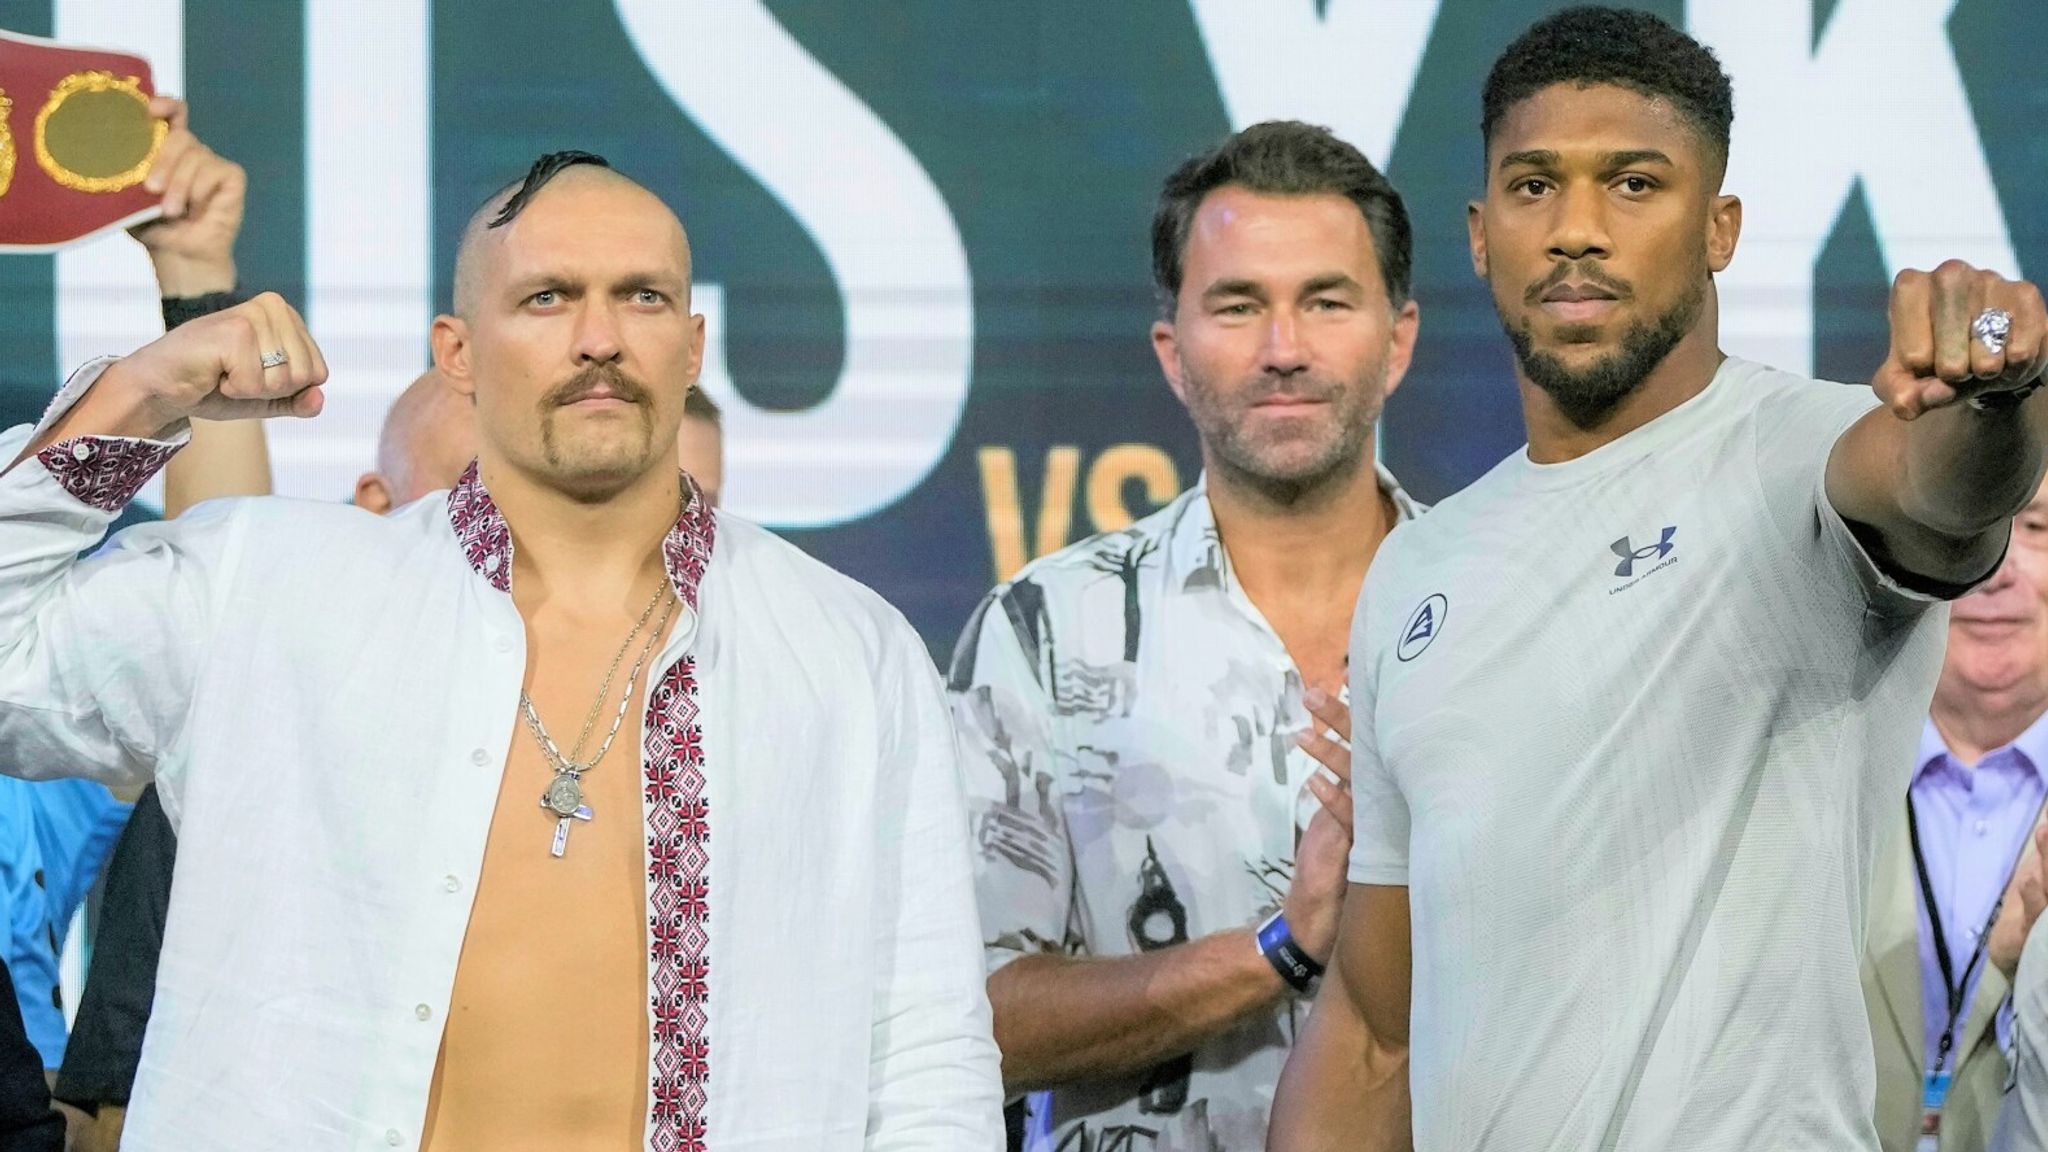 Usyk vs AJ Predictions from boxing experts ahead of huge Oleksandr Usyk vs Anthony Joshua rematch Boxing News Sky Sports